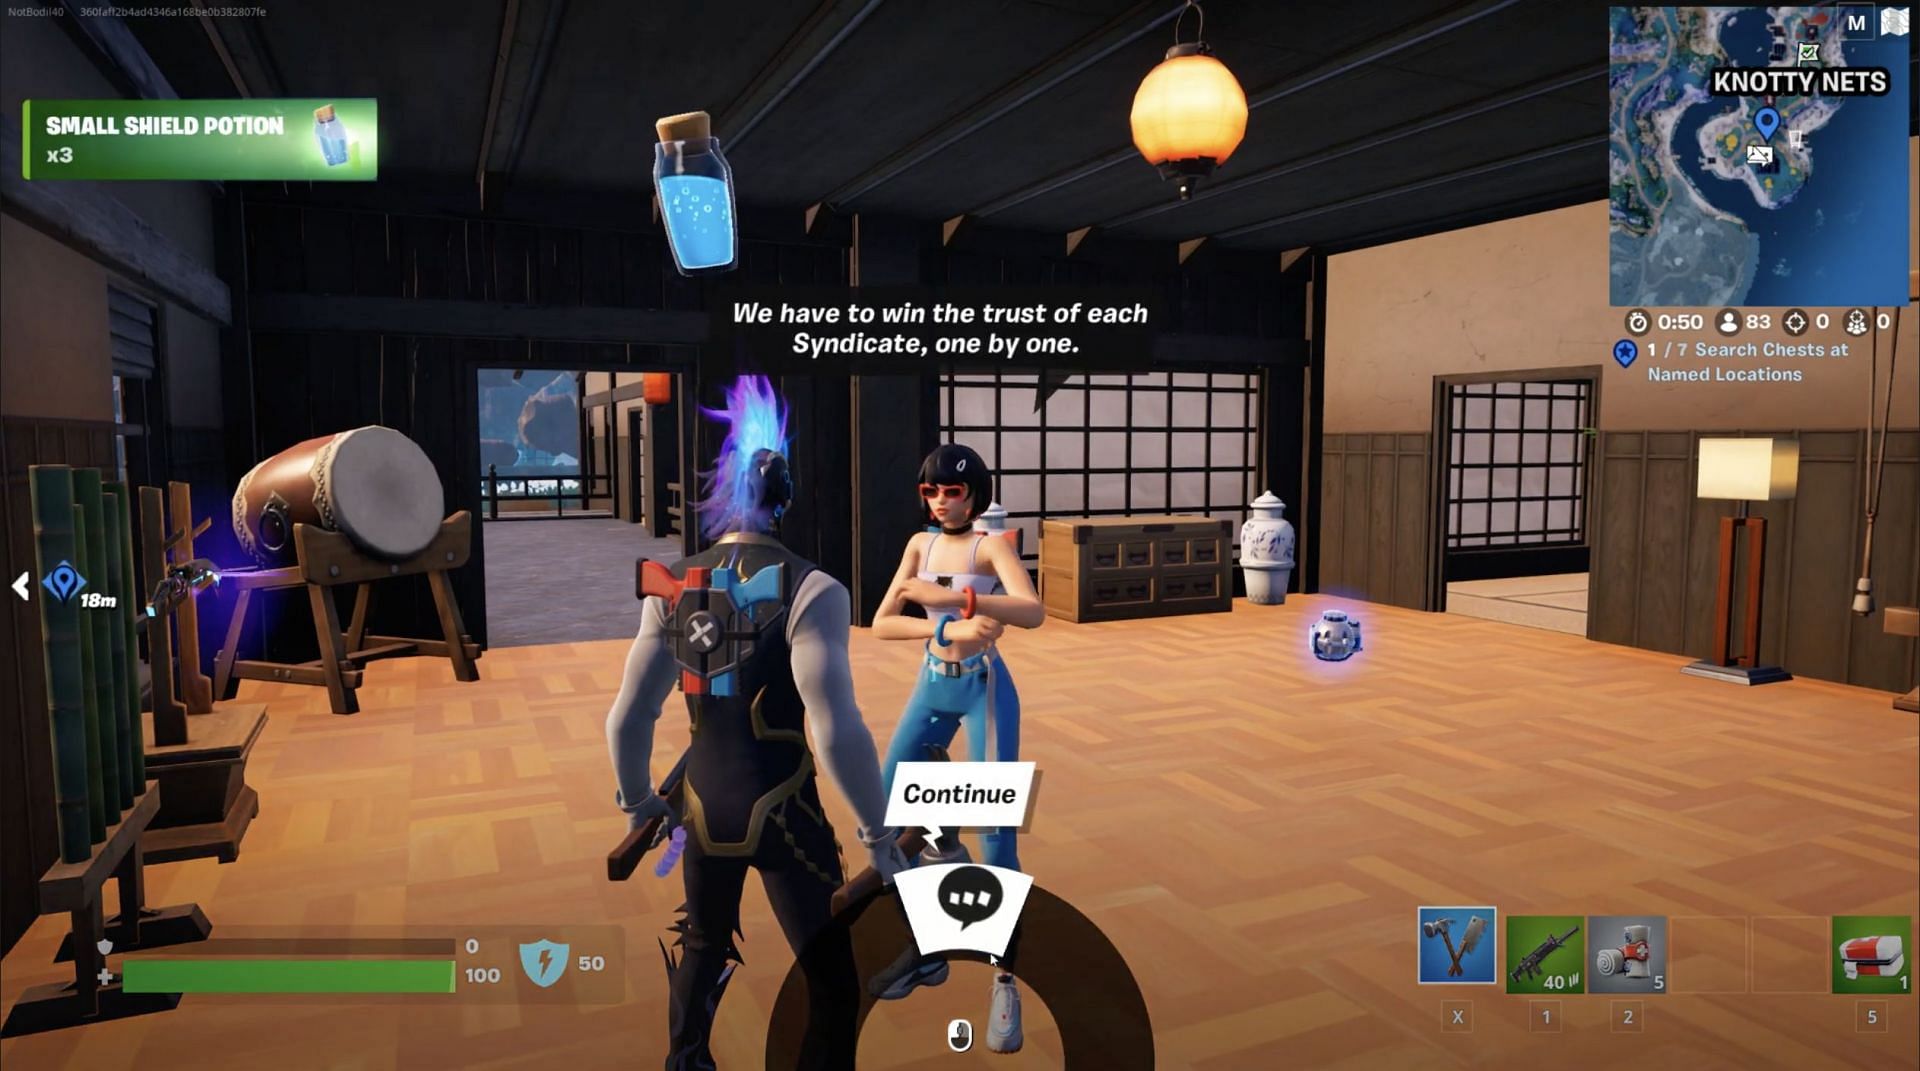 Interact with the NPC (Image via Bodil40 on YouTube)